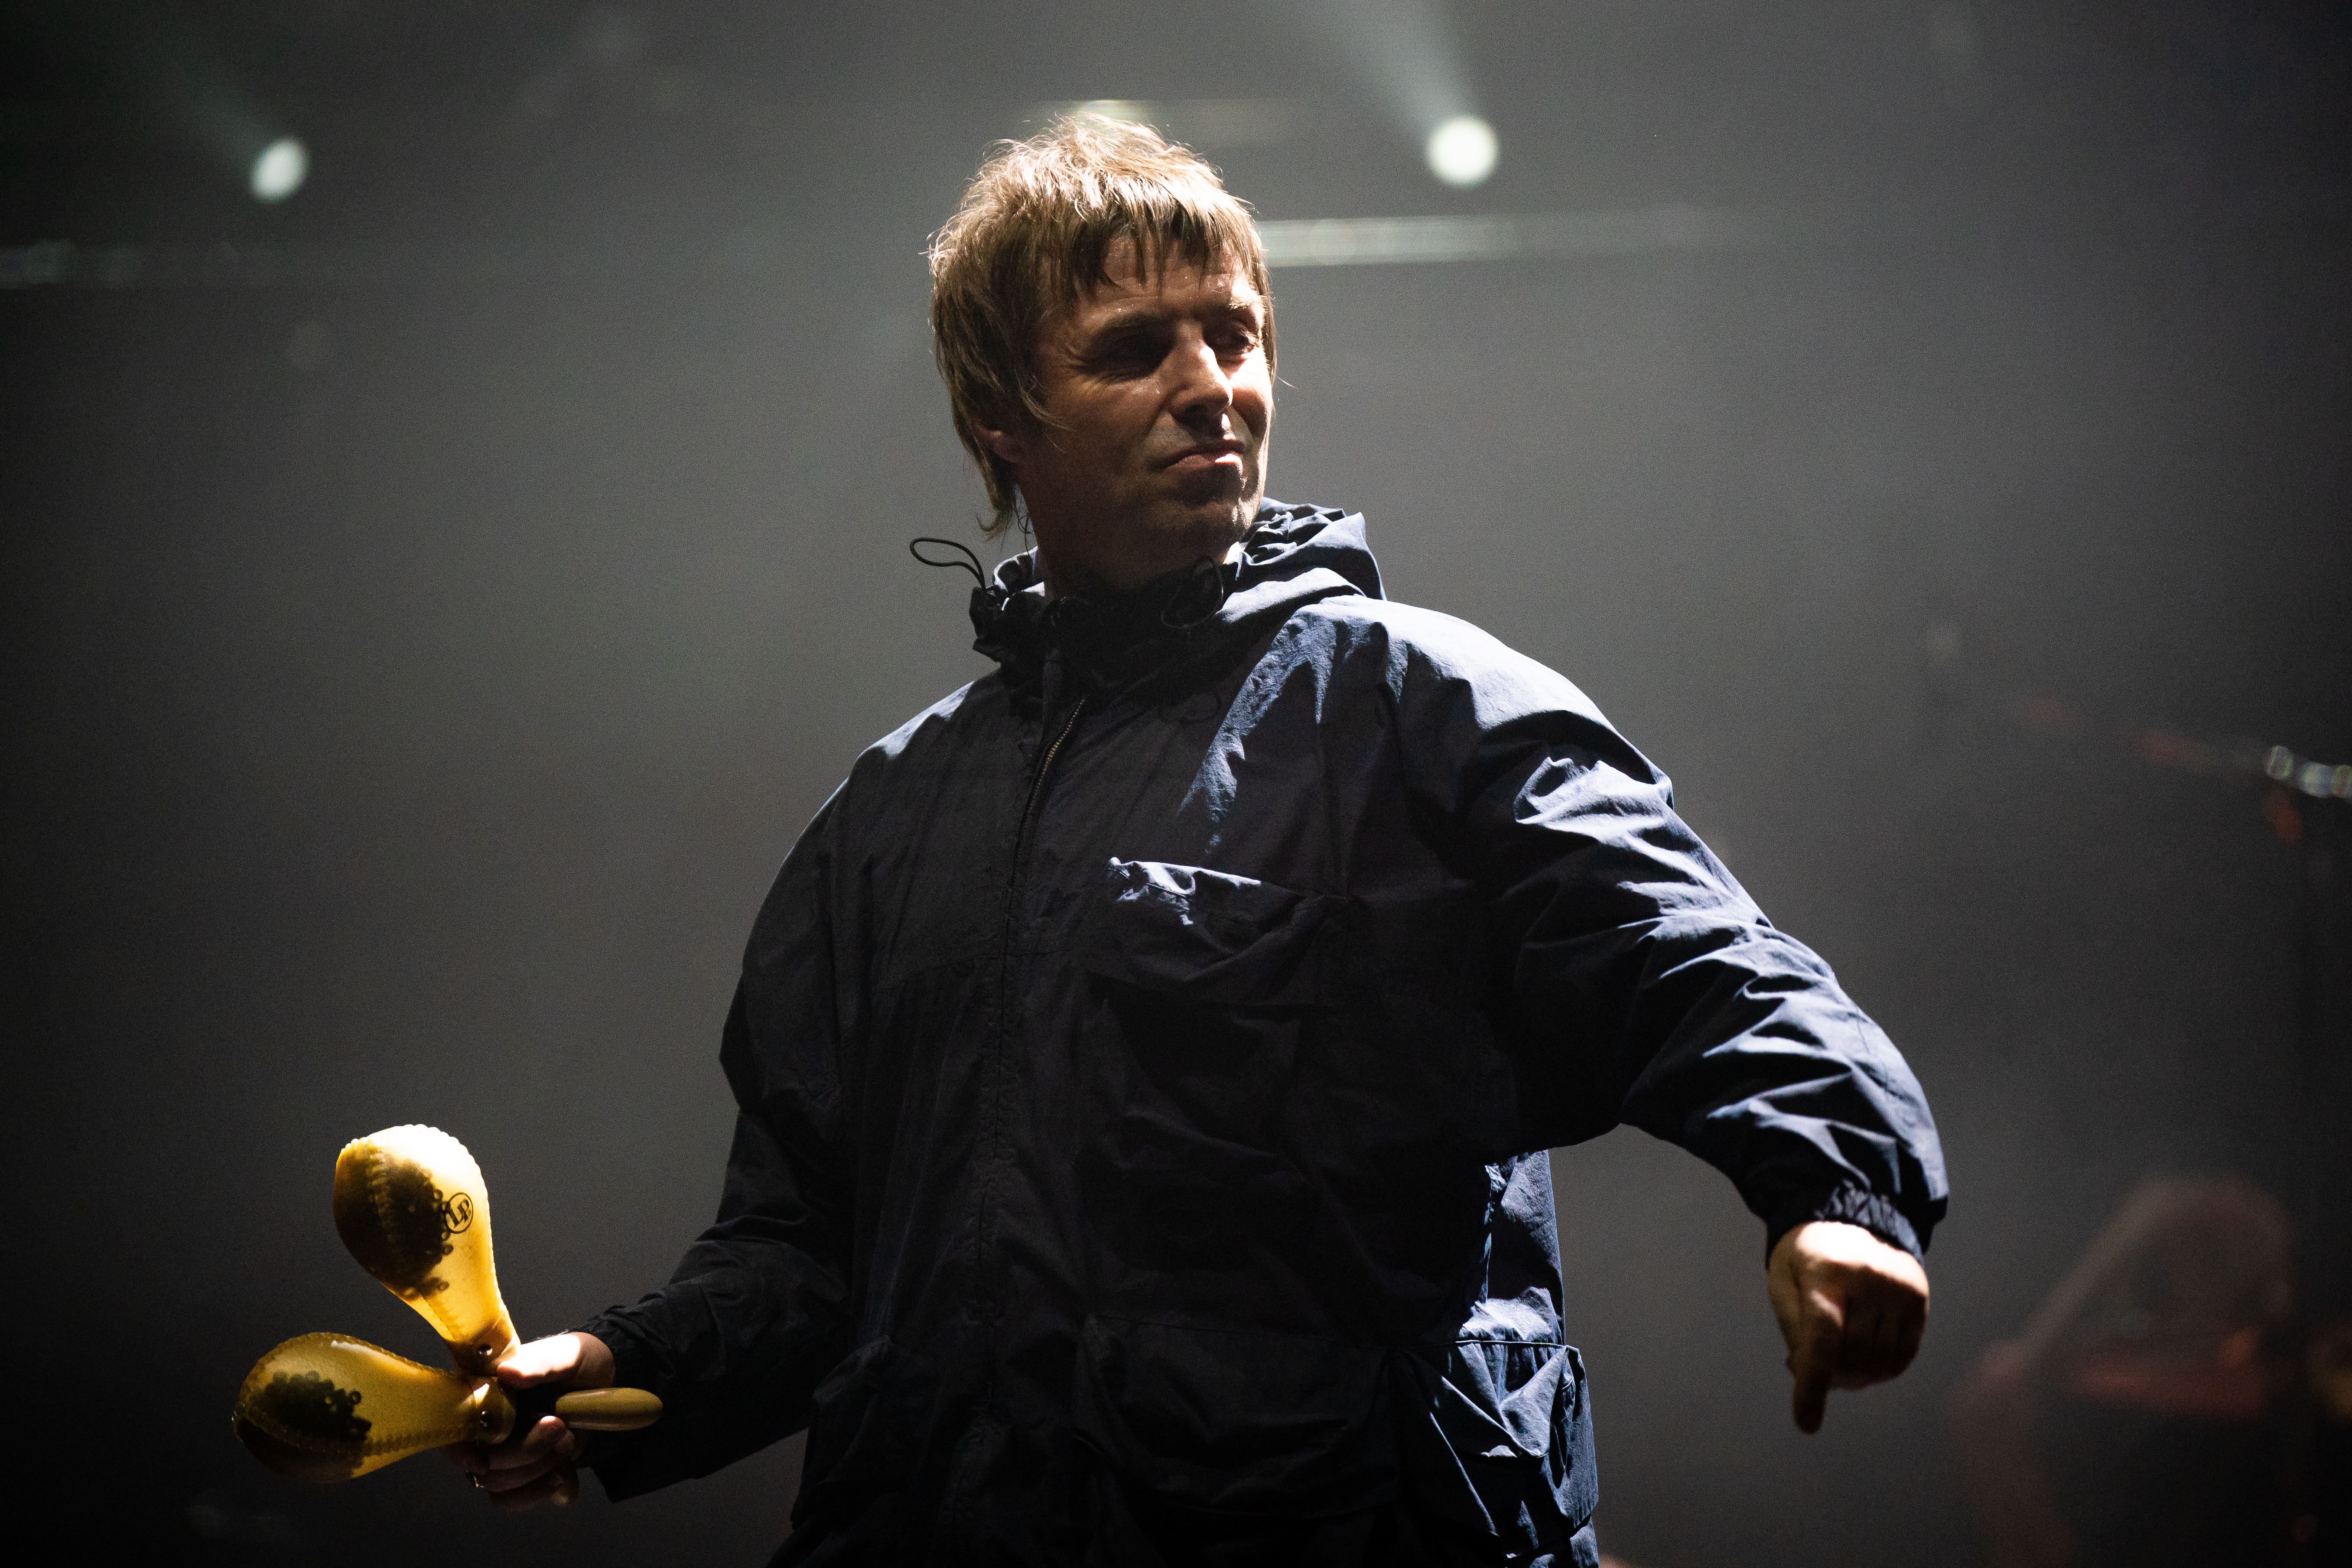 Liam Gallagher said he wishes he had writing the ‘Barbie Girl’ song